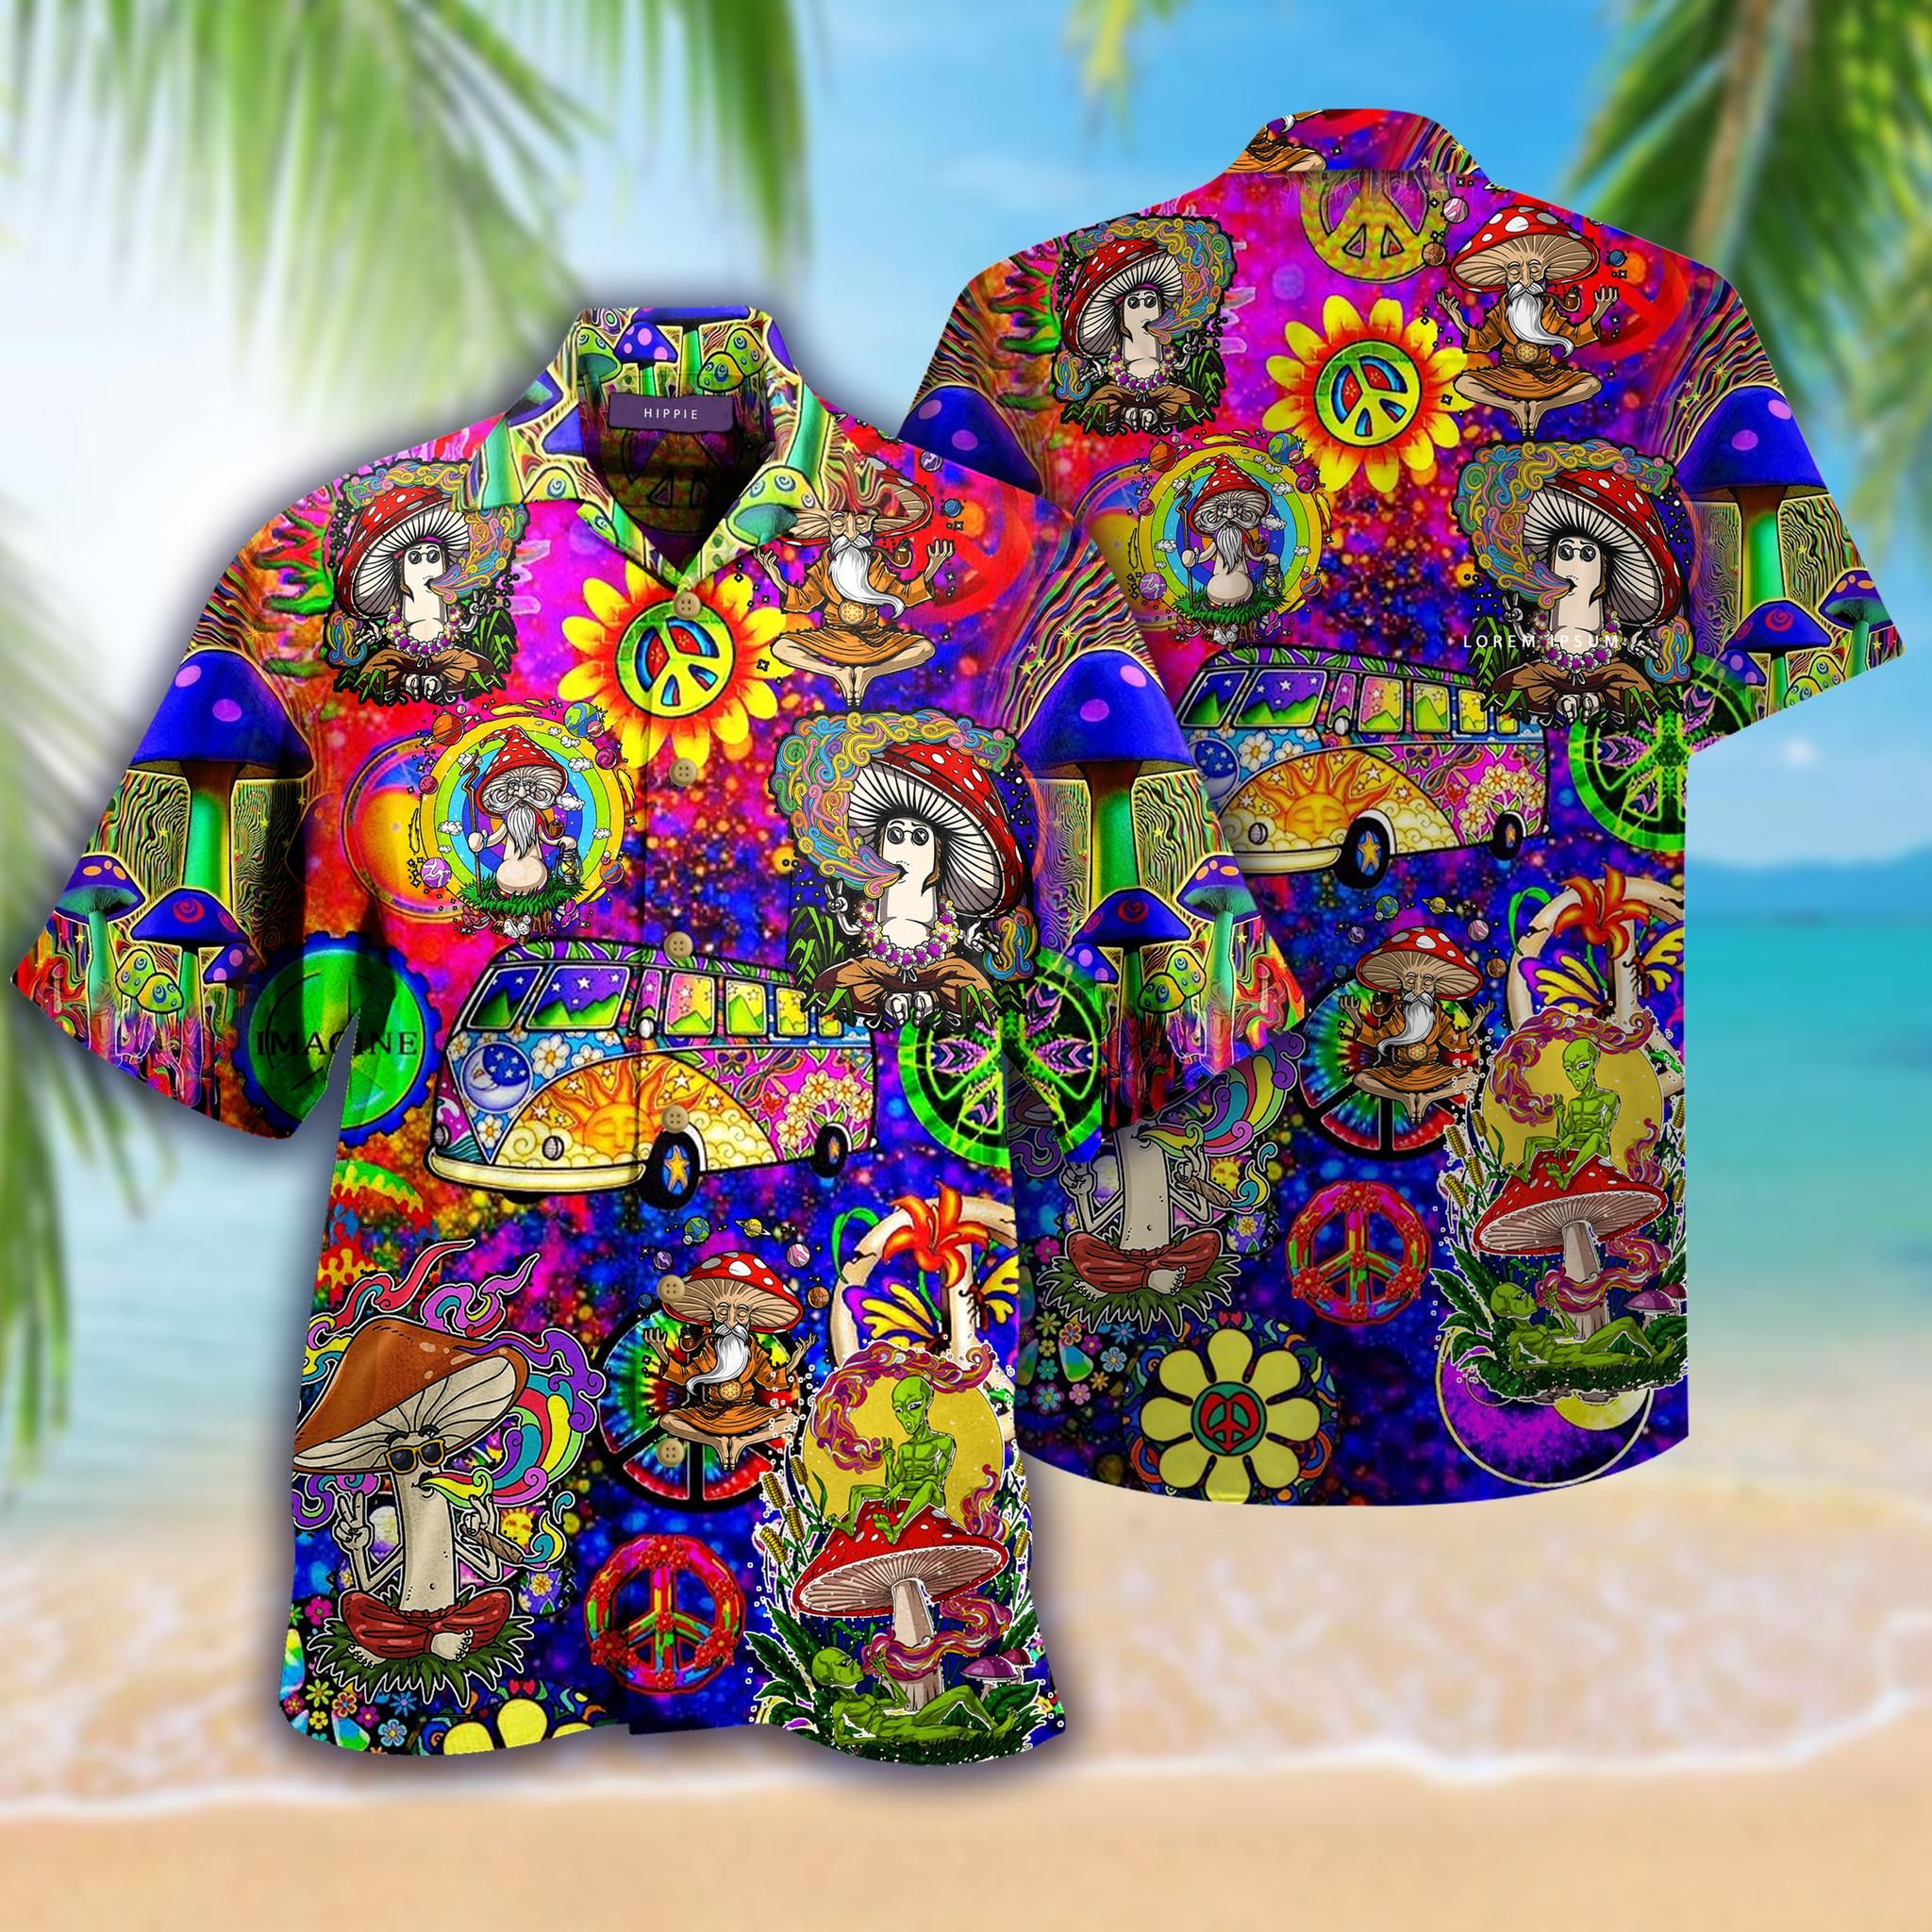 Don’T Insult Alligator Until You Cross The River Aloha Hawaiian Shirt Colorful Short Sleeve Summer Beach Casual Shirt For Men And Women